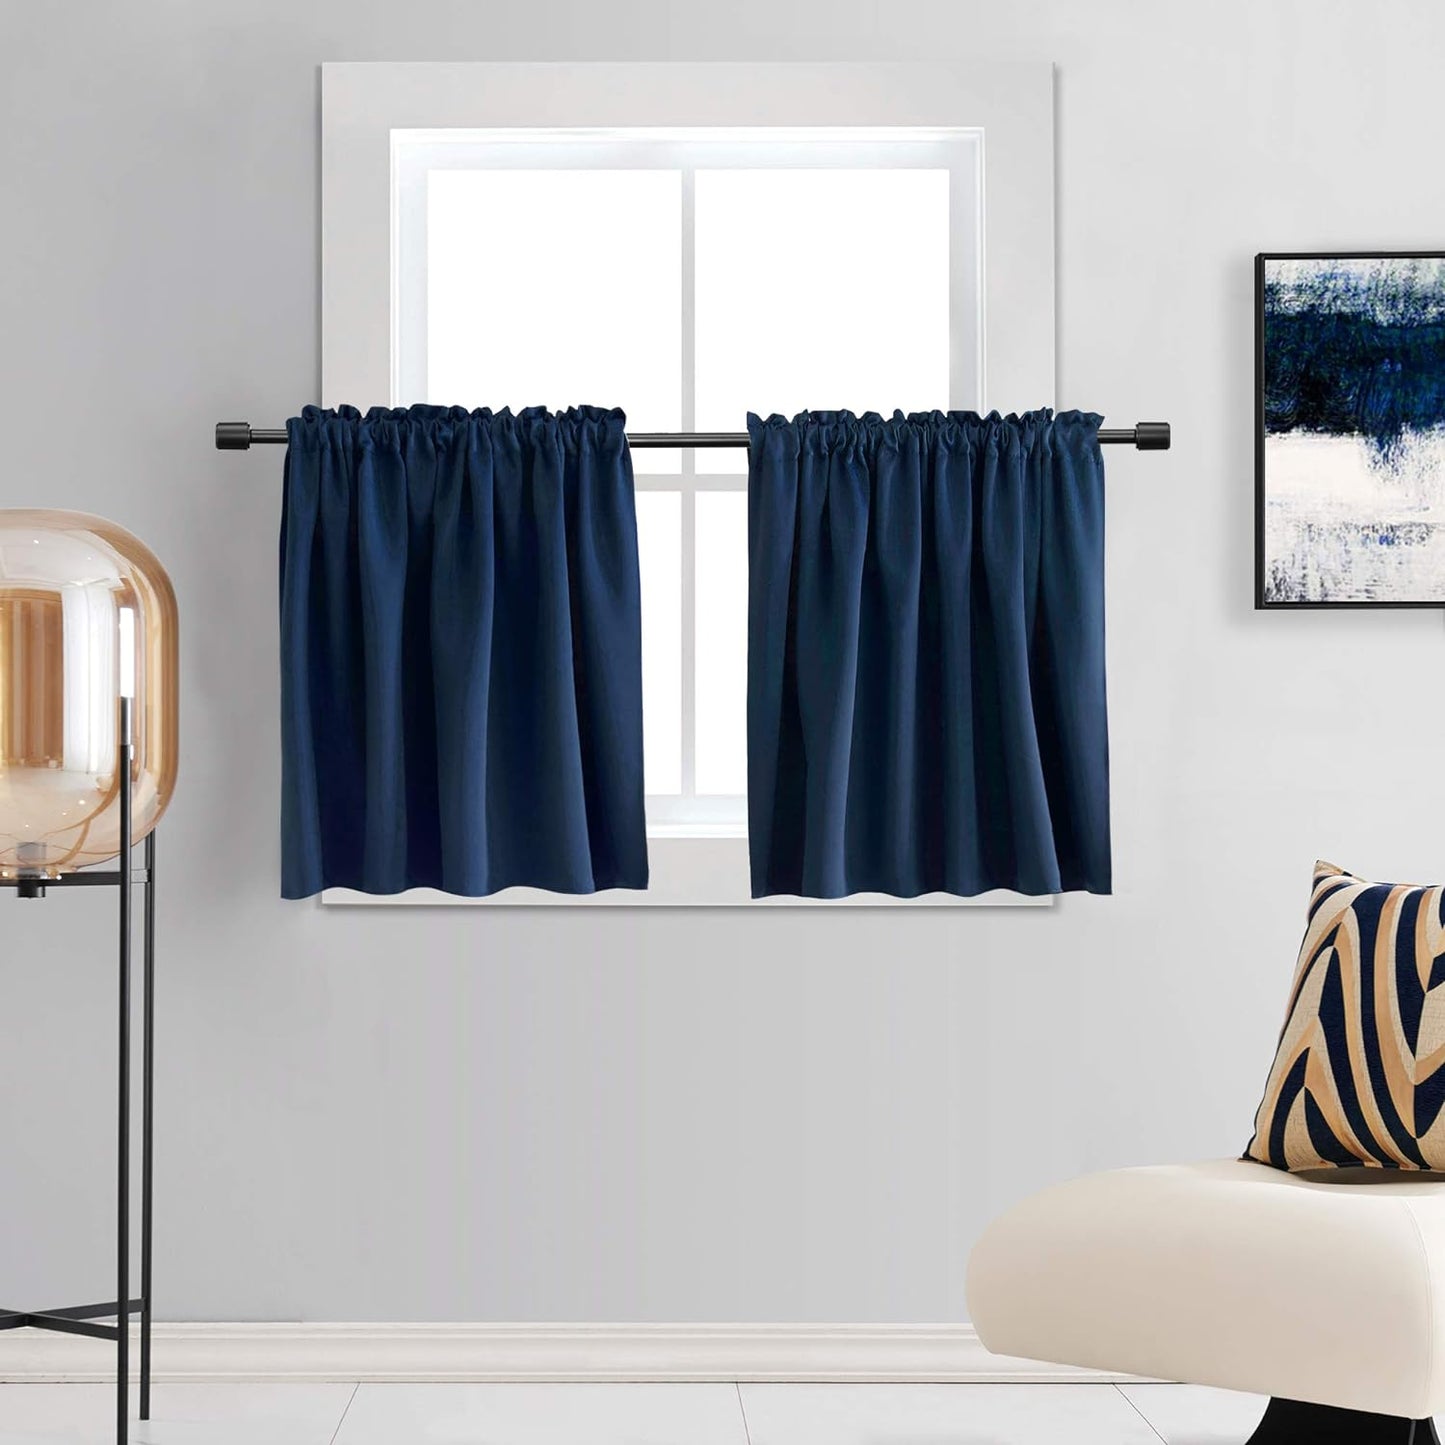 DONREN 24 Inch Length Curtains- 2 Panels Blackout Thermal Insulating Small Curtain Tiers for Bathroom with Rod Pocket (Black,42 Inch Width)  DONREN Navy Blue 42" X 30" 